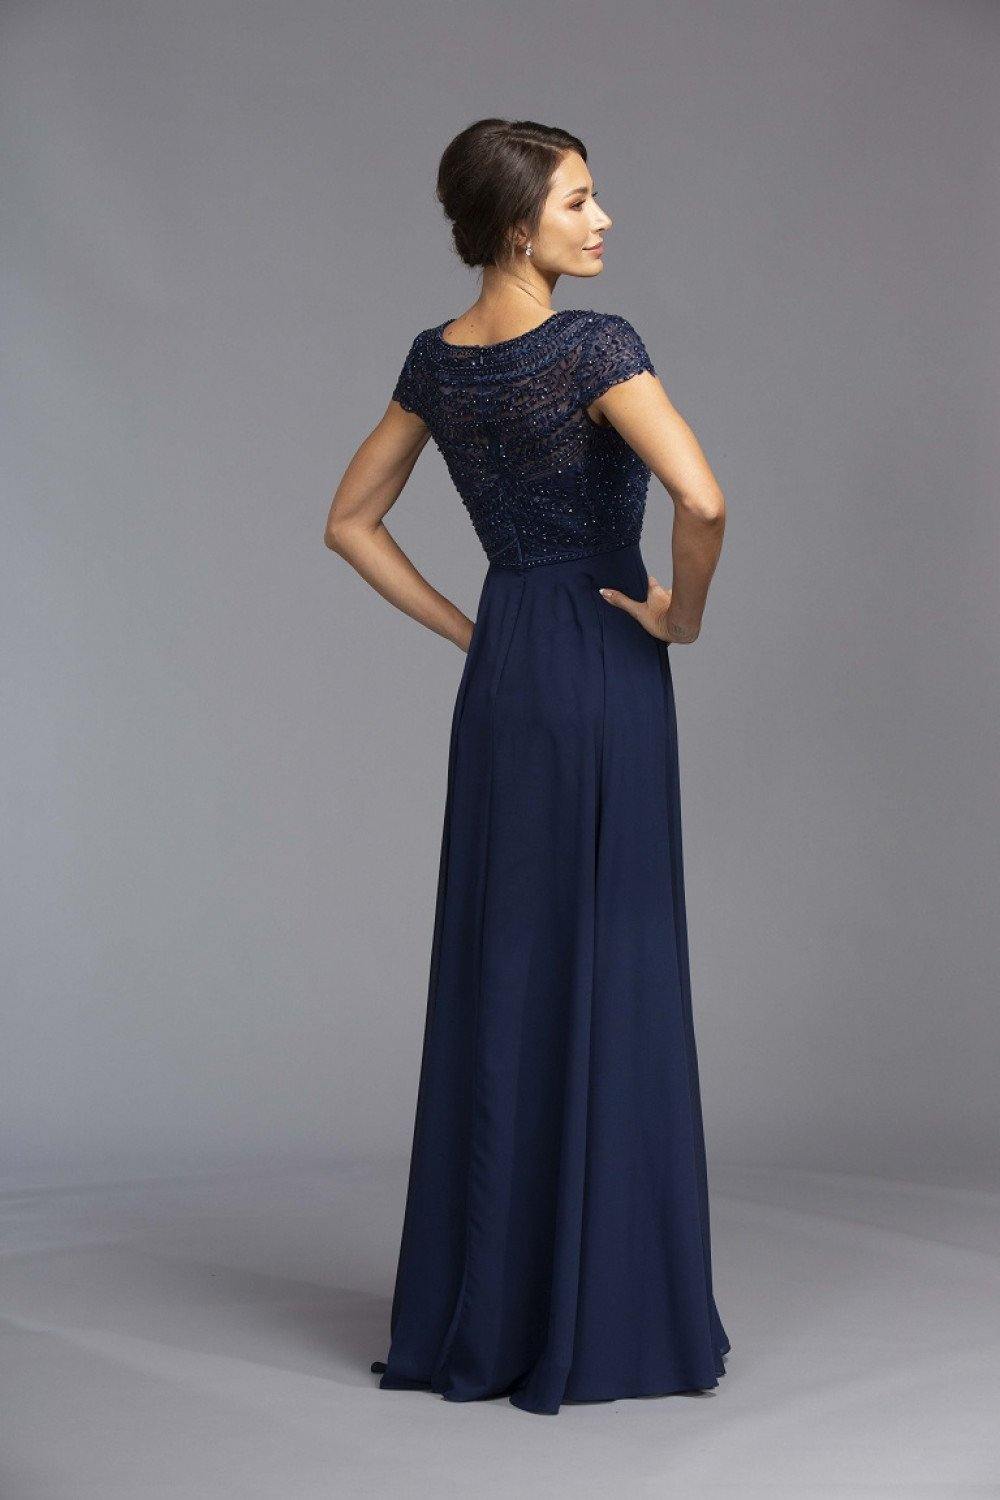 Long Formal Dress Mother of the Bride - The Dress Outlet ASpeed